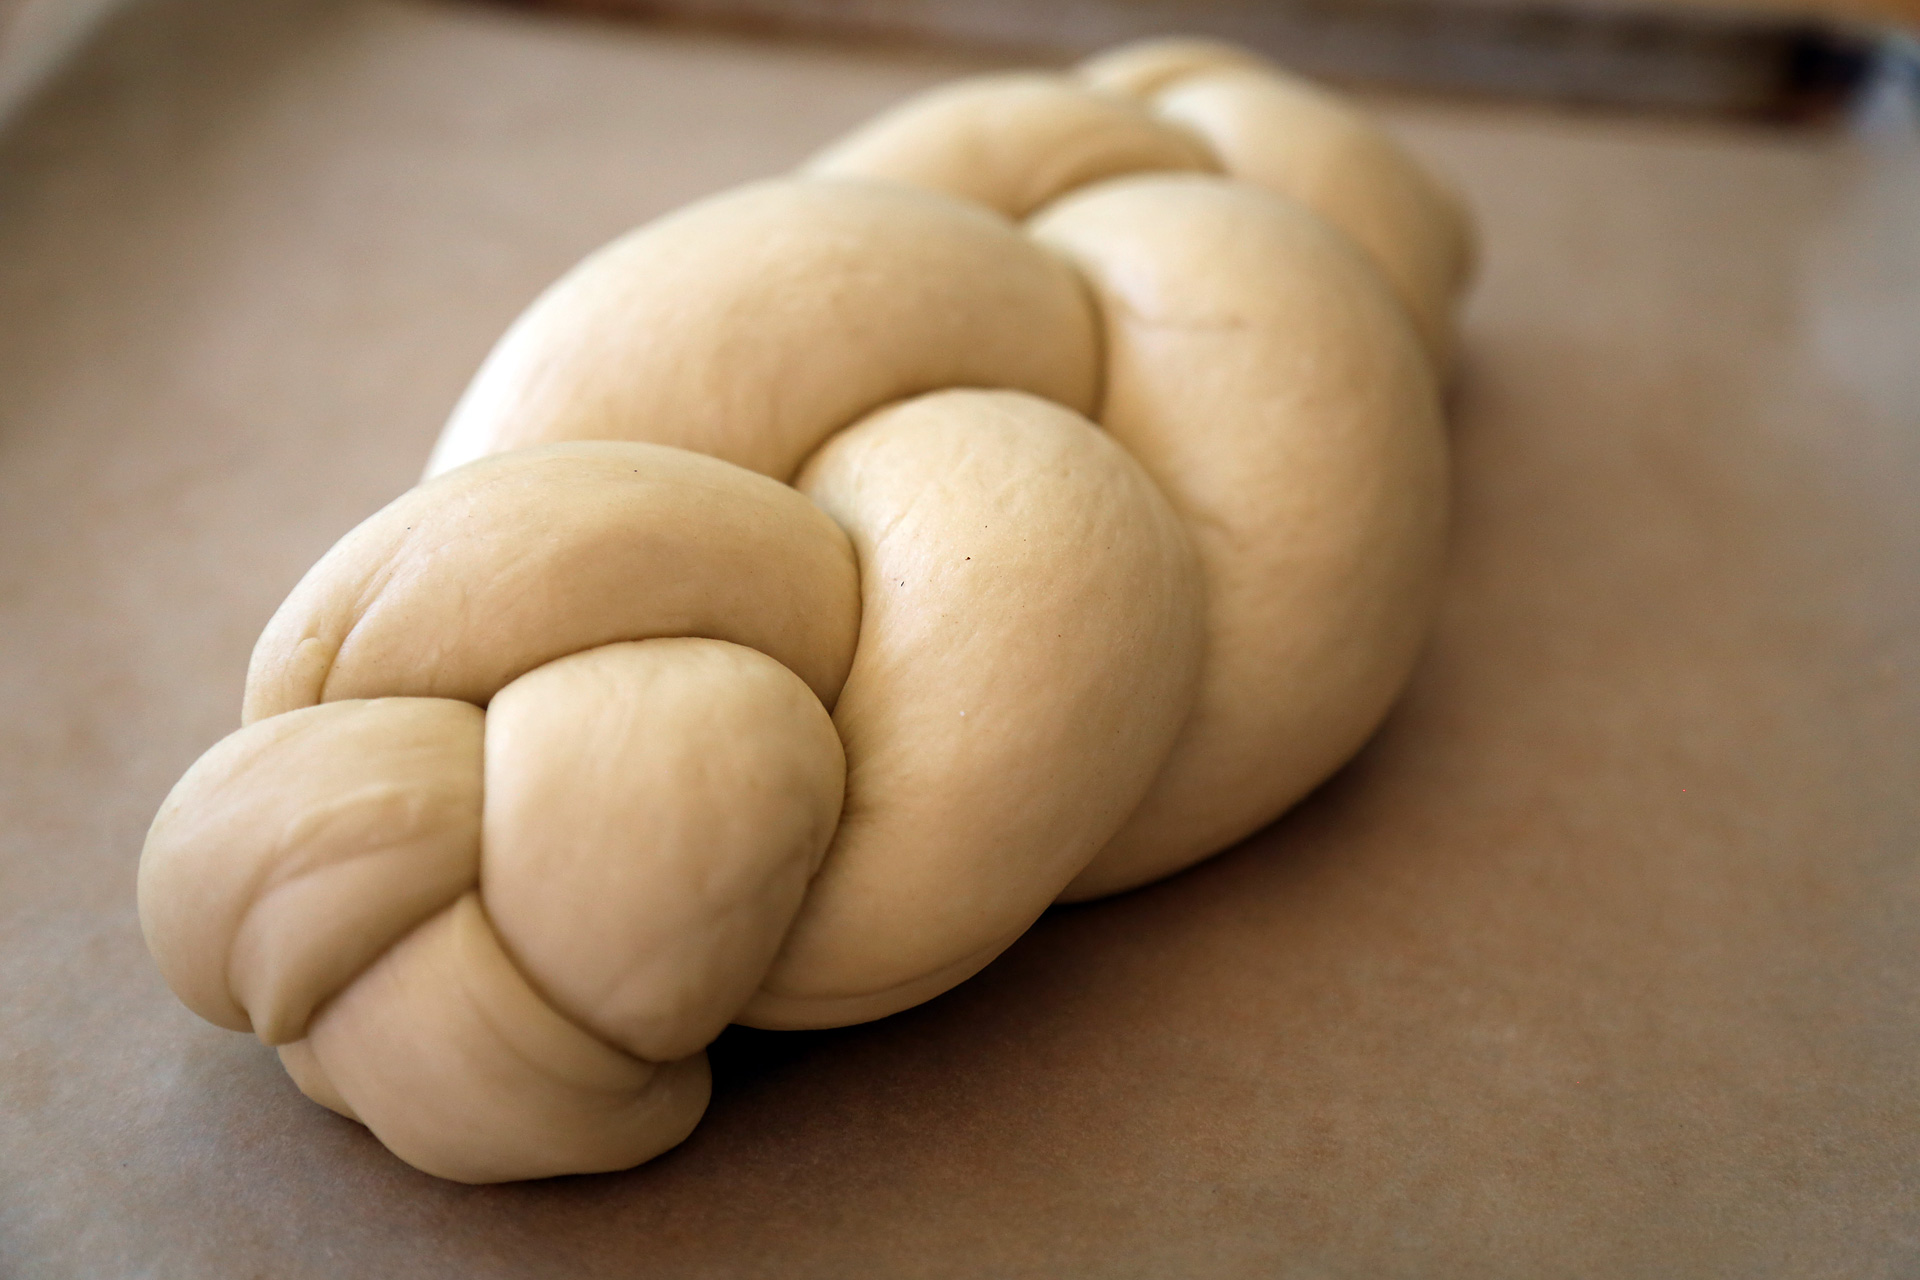 Wait until the bread is puffy and nearly doubles in size, about 30 to 60 minutes.